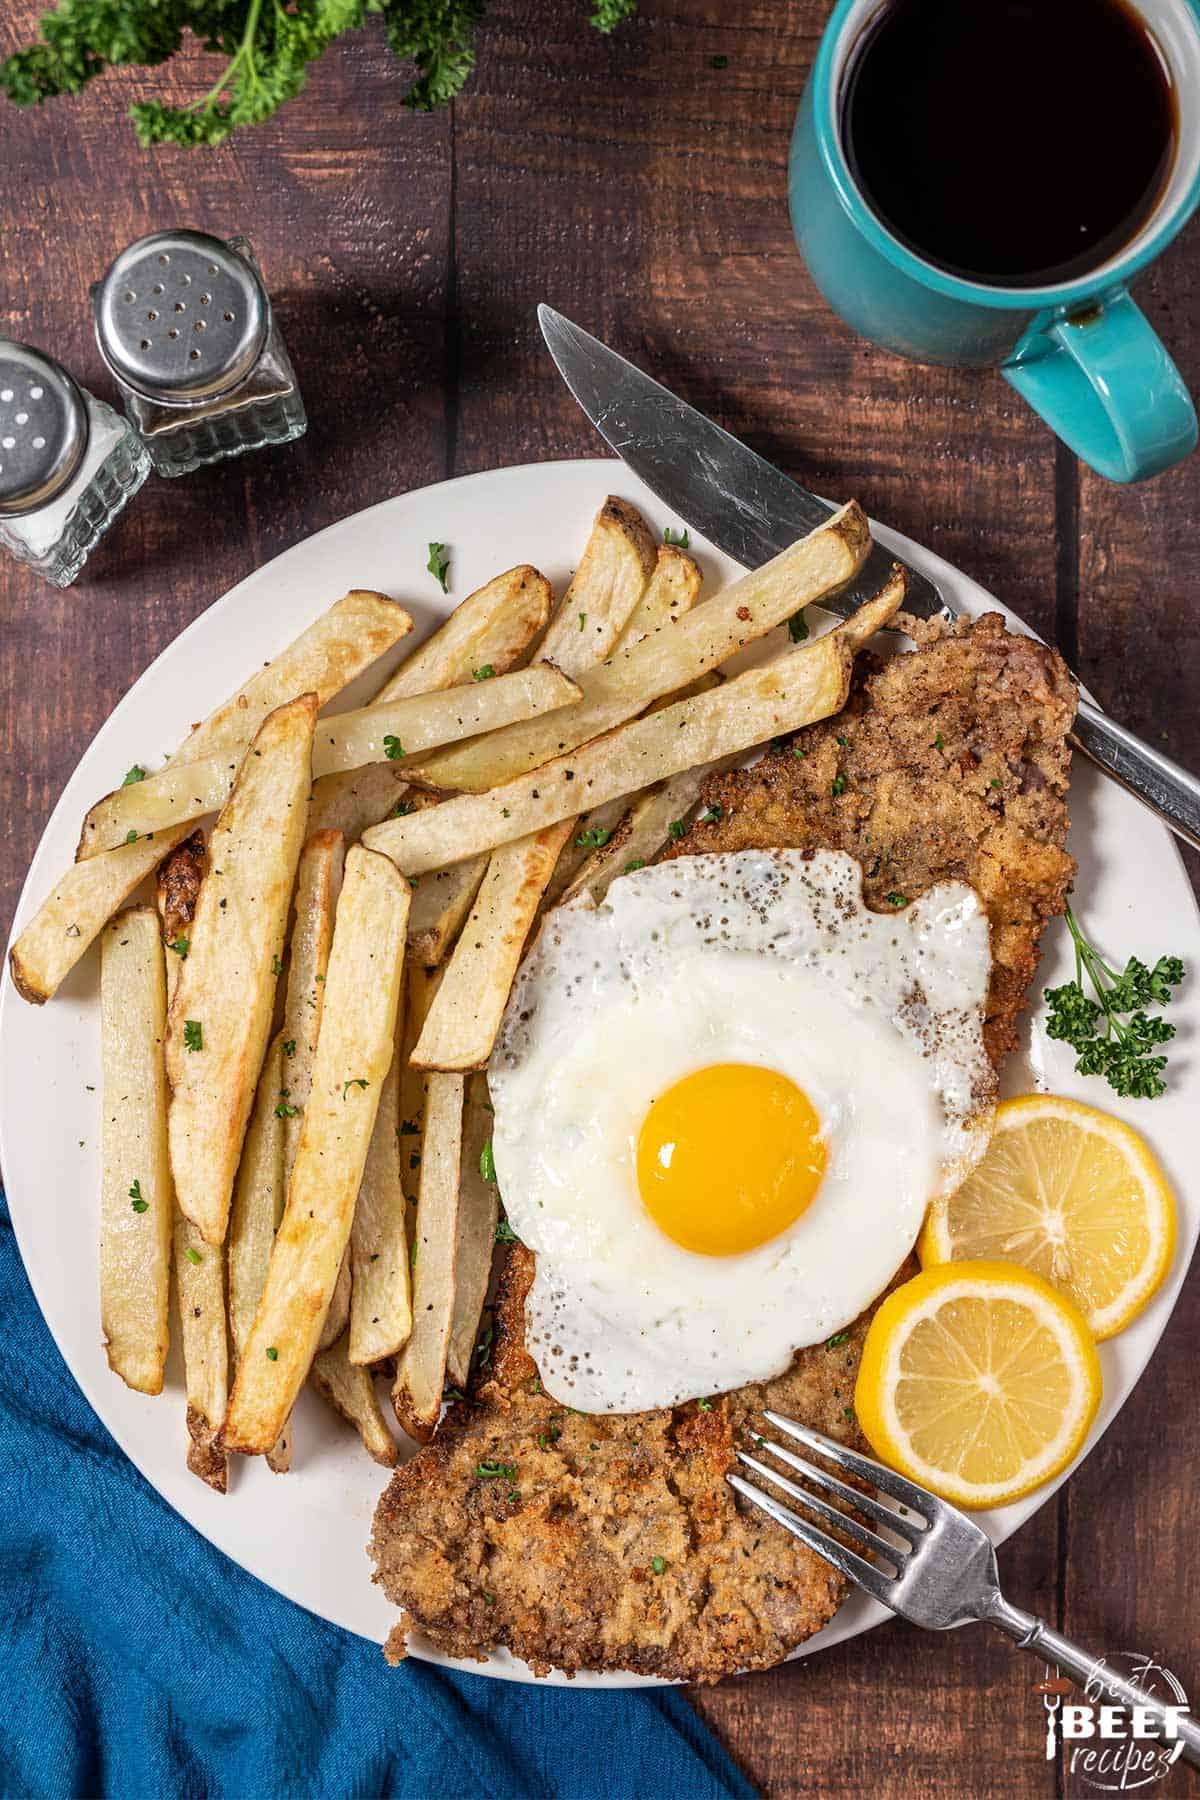 milanesa de res on a plate with fries, egg, and lemon slices